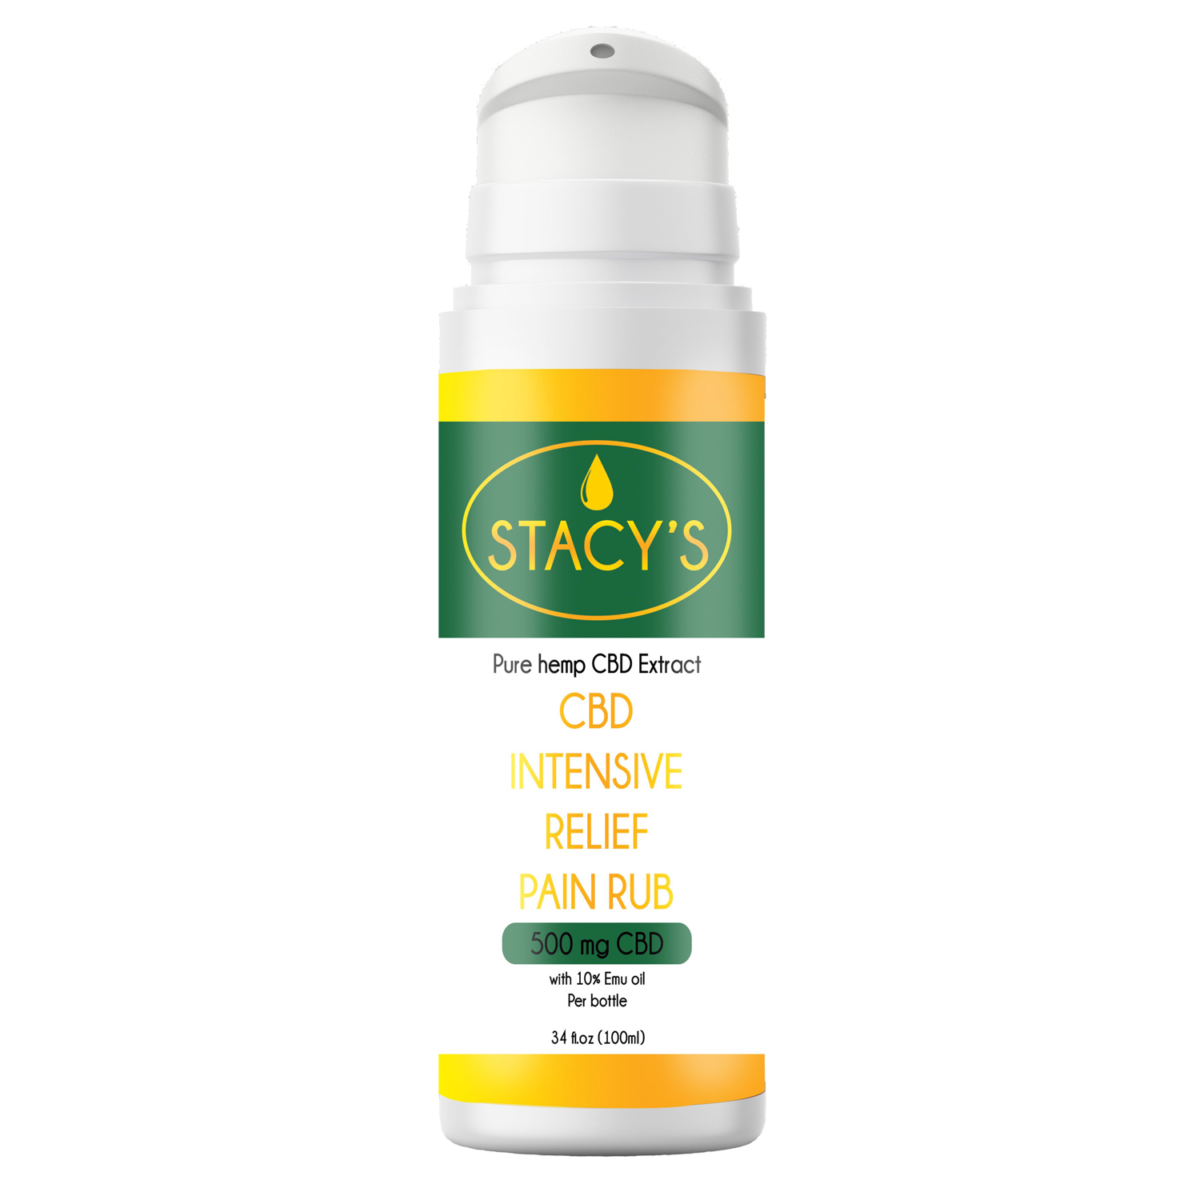 Stacy's CBD Intensive Relief Pain Rub